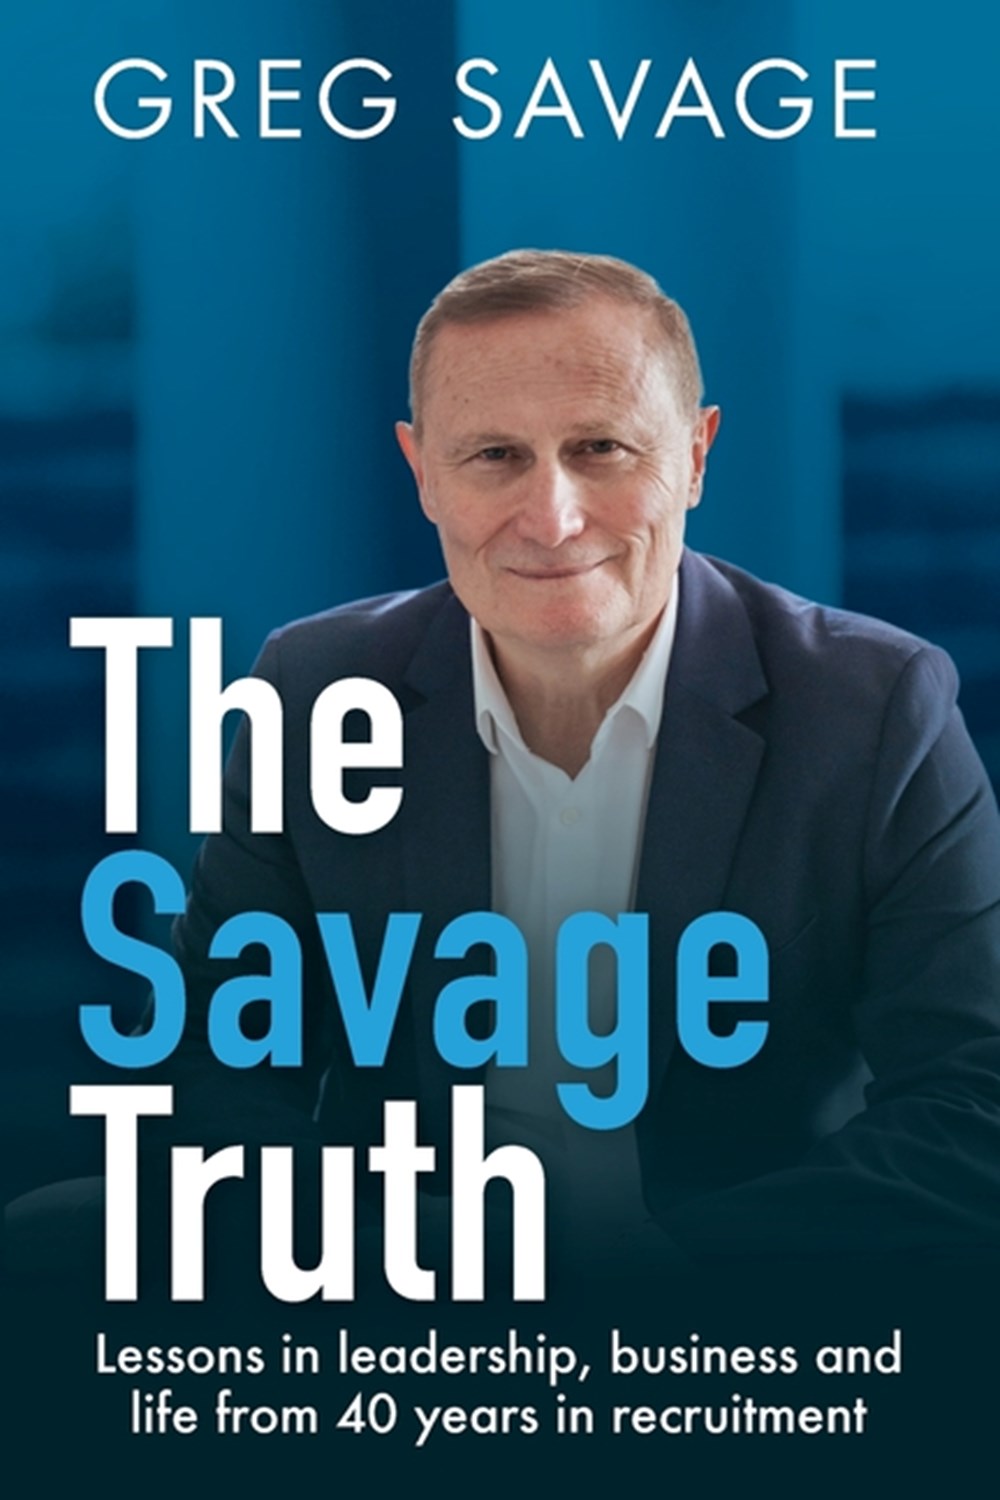 Savage Truth Lessons in Leadership, Business and Life from 40 Years in Recruitment